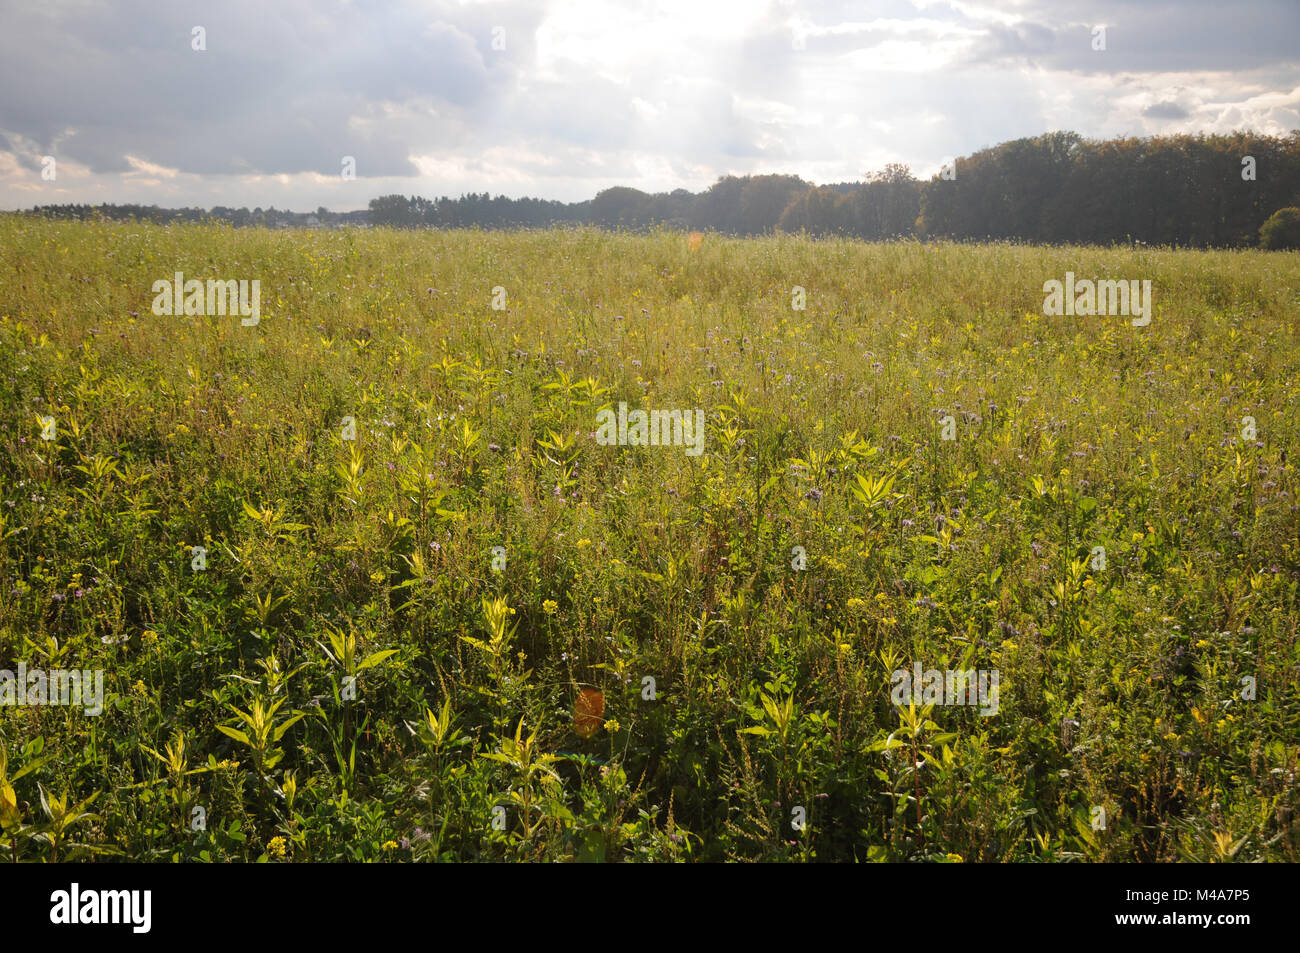 Guizotia abyssinica, Ramtil, Niger seed, green manure Stock Photo